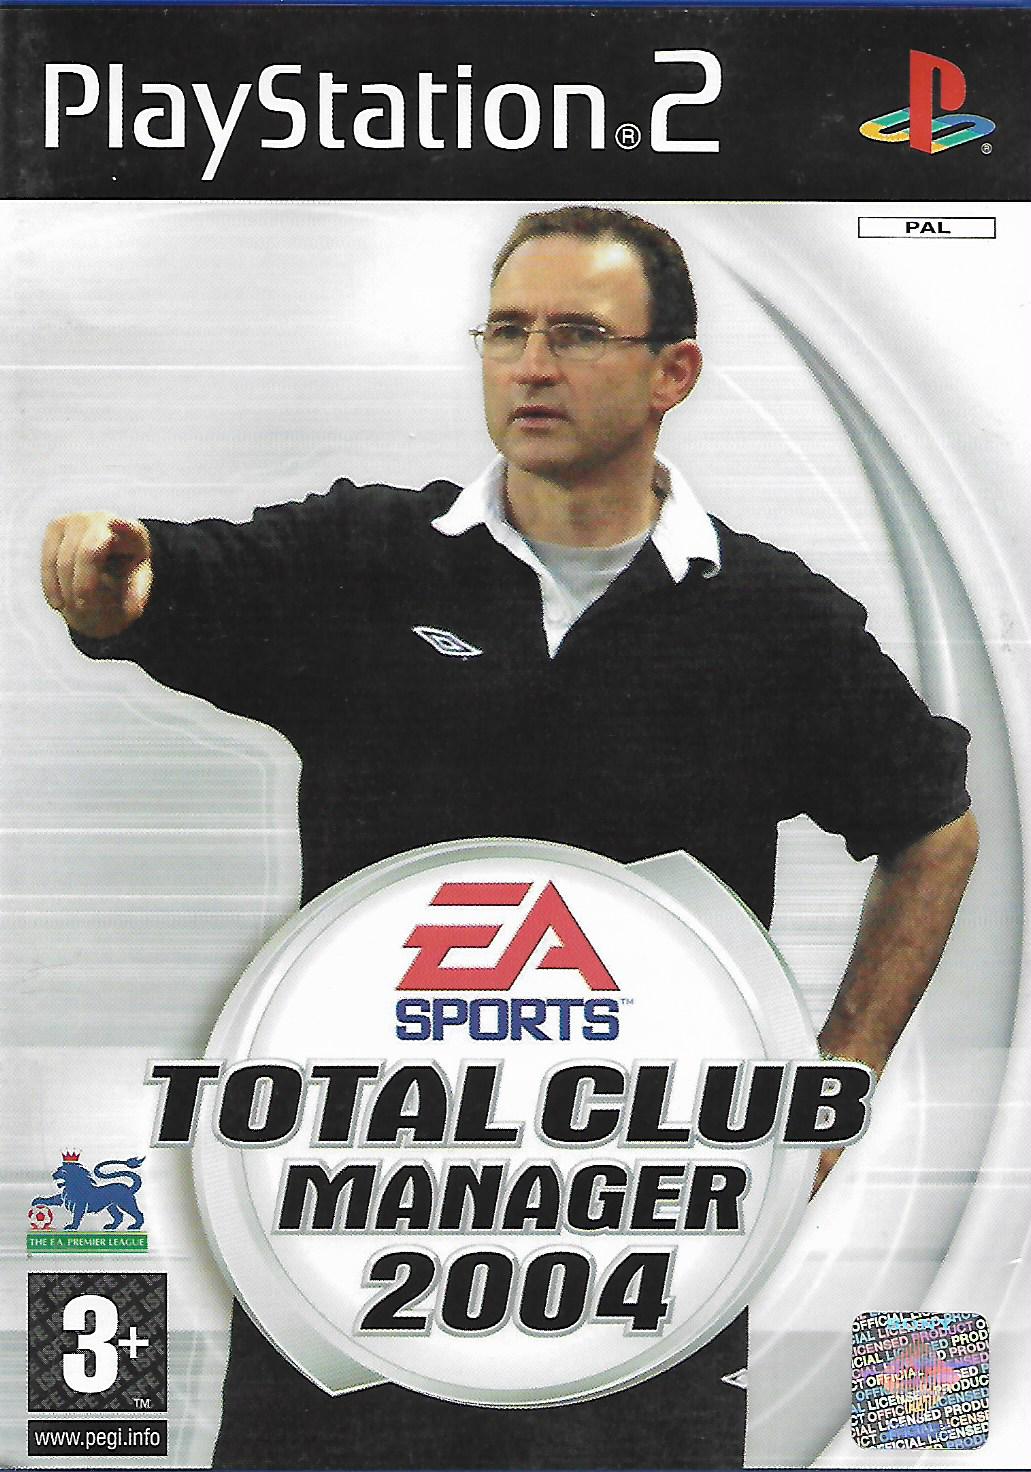 TOTAL CLUB MANAGER 2004 (PS2 - bazar)